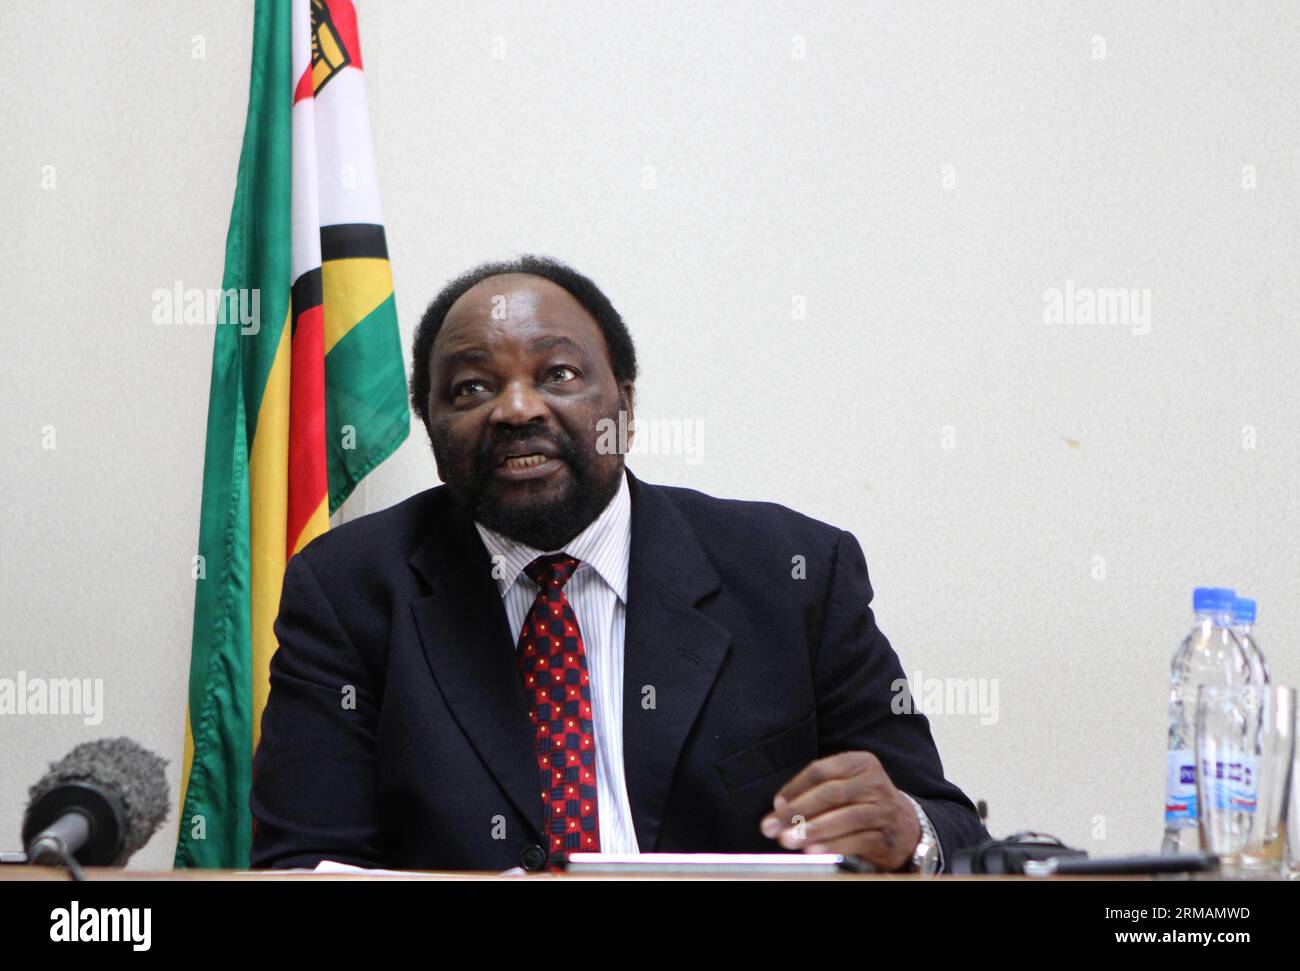 (140716) -- HARARE, July 16, 2014 (Xinhua) -- Zimbabwean Foreign Affairs Minister Simbarashe Mumbengegwi addresses the media in Harare, Zimbabwe, July 16, 2014. Mumbengegwi announced that Zimbabwe will host the 34th Southern African Development Community (SADC) Heads of State and Government Summit in Victoria Falls from August 17 to 18 this year as Zimbabwean President Robert Mugabe assume the Chairmanship of the southern African block from Joyce Banda of the Republic of Malawi. (Xinhua/Stringer) ZIMBABWE-HARARE-SADC-PRESS CONFERENCE PUBLICATIONxNOTxINxCHN   Harare July 16 2014 XINHUA Zimbabwe Stock Photo